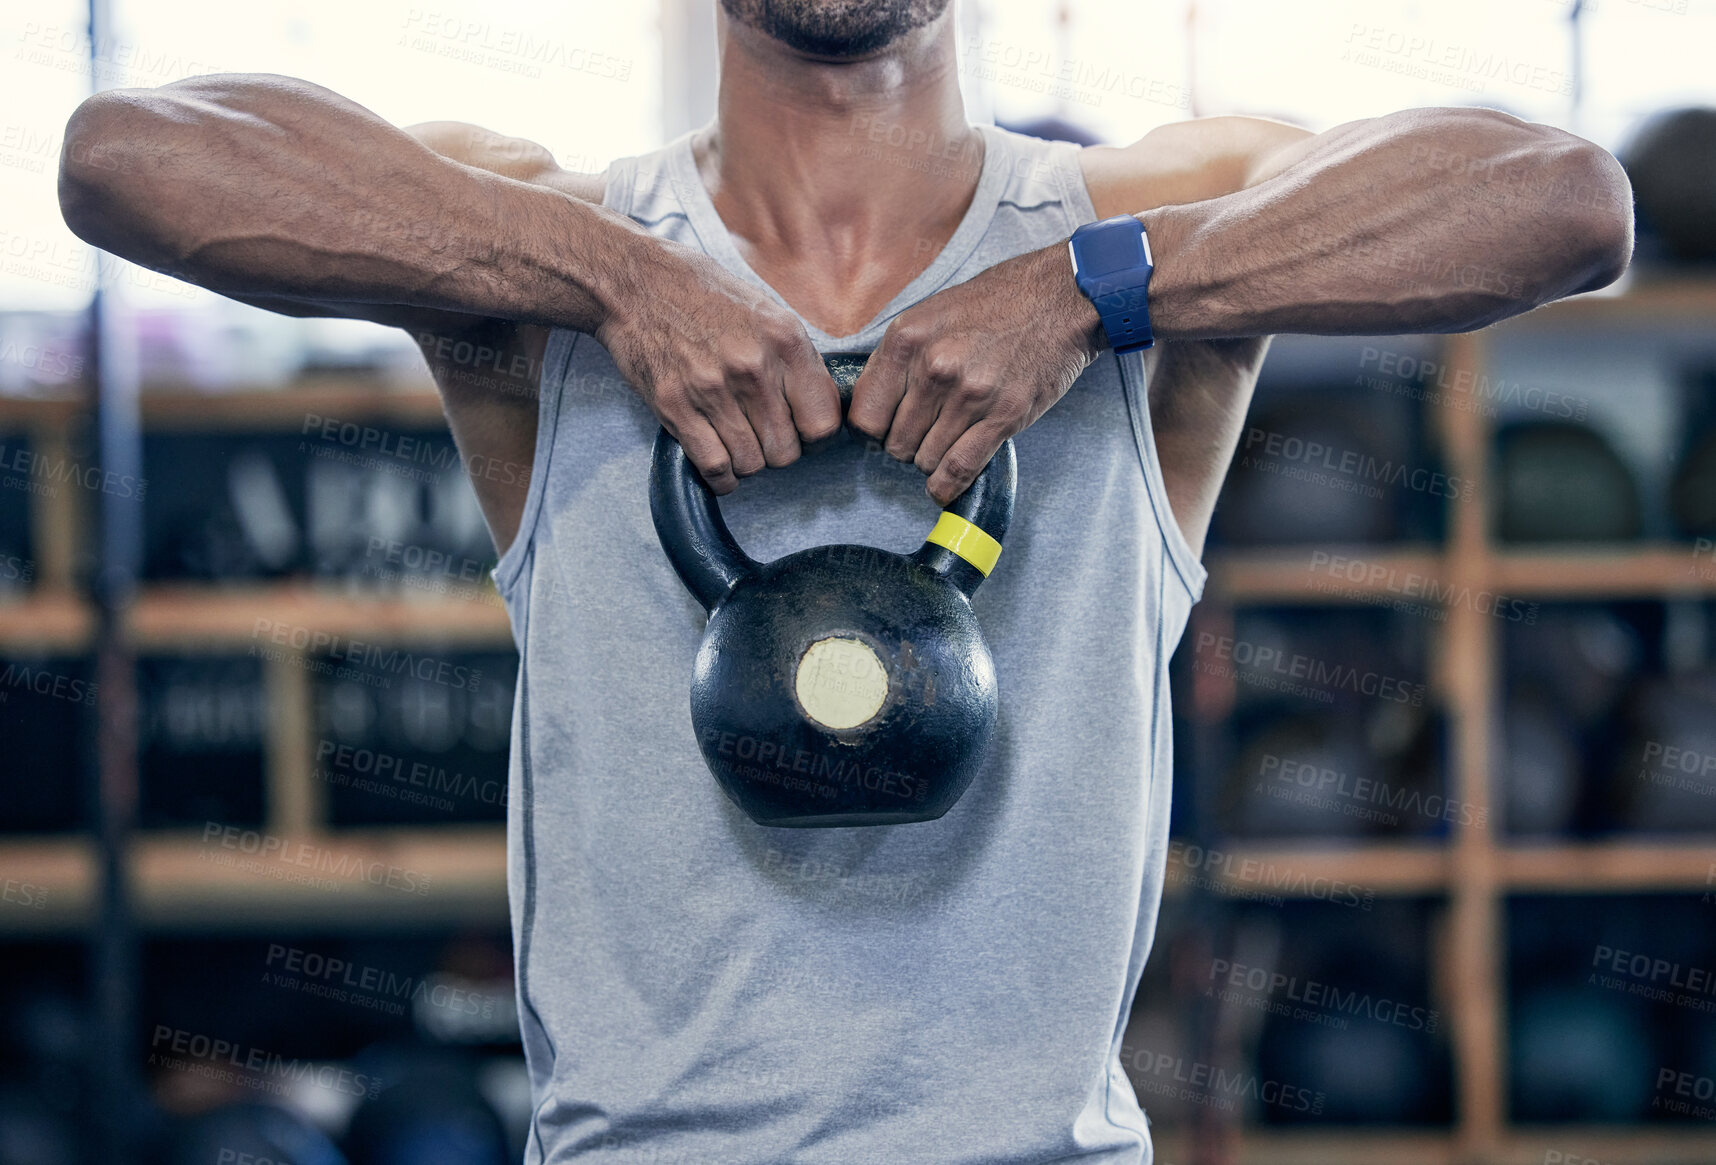 Buy stock photo Kettlebell, strong and arms of person for workout, exercise and development for sport. Bodybuilder, lift and body of athlete with equipment at gym for wellness, training and healthy progress